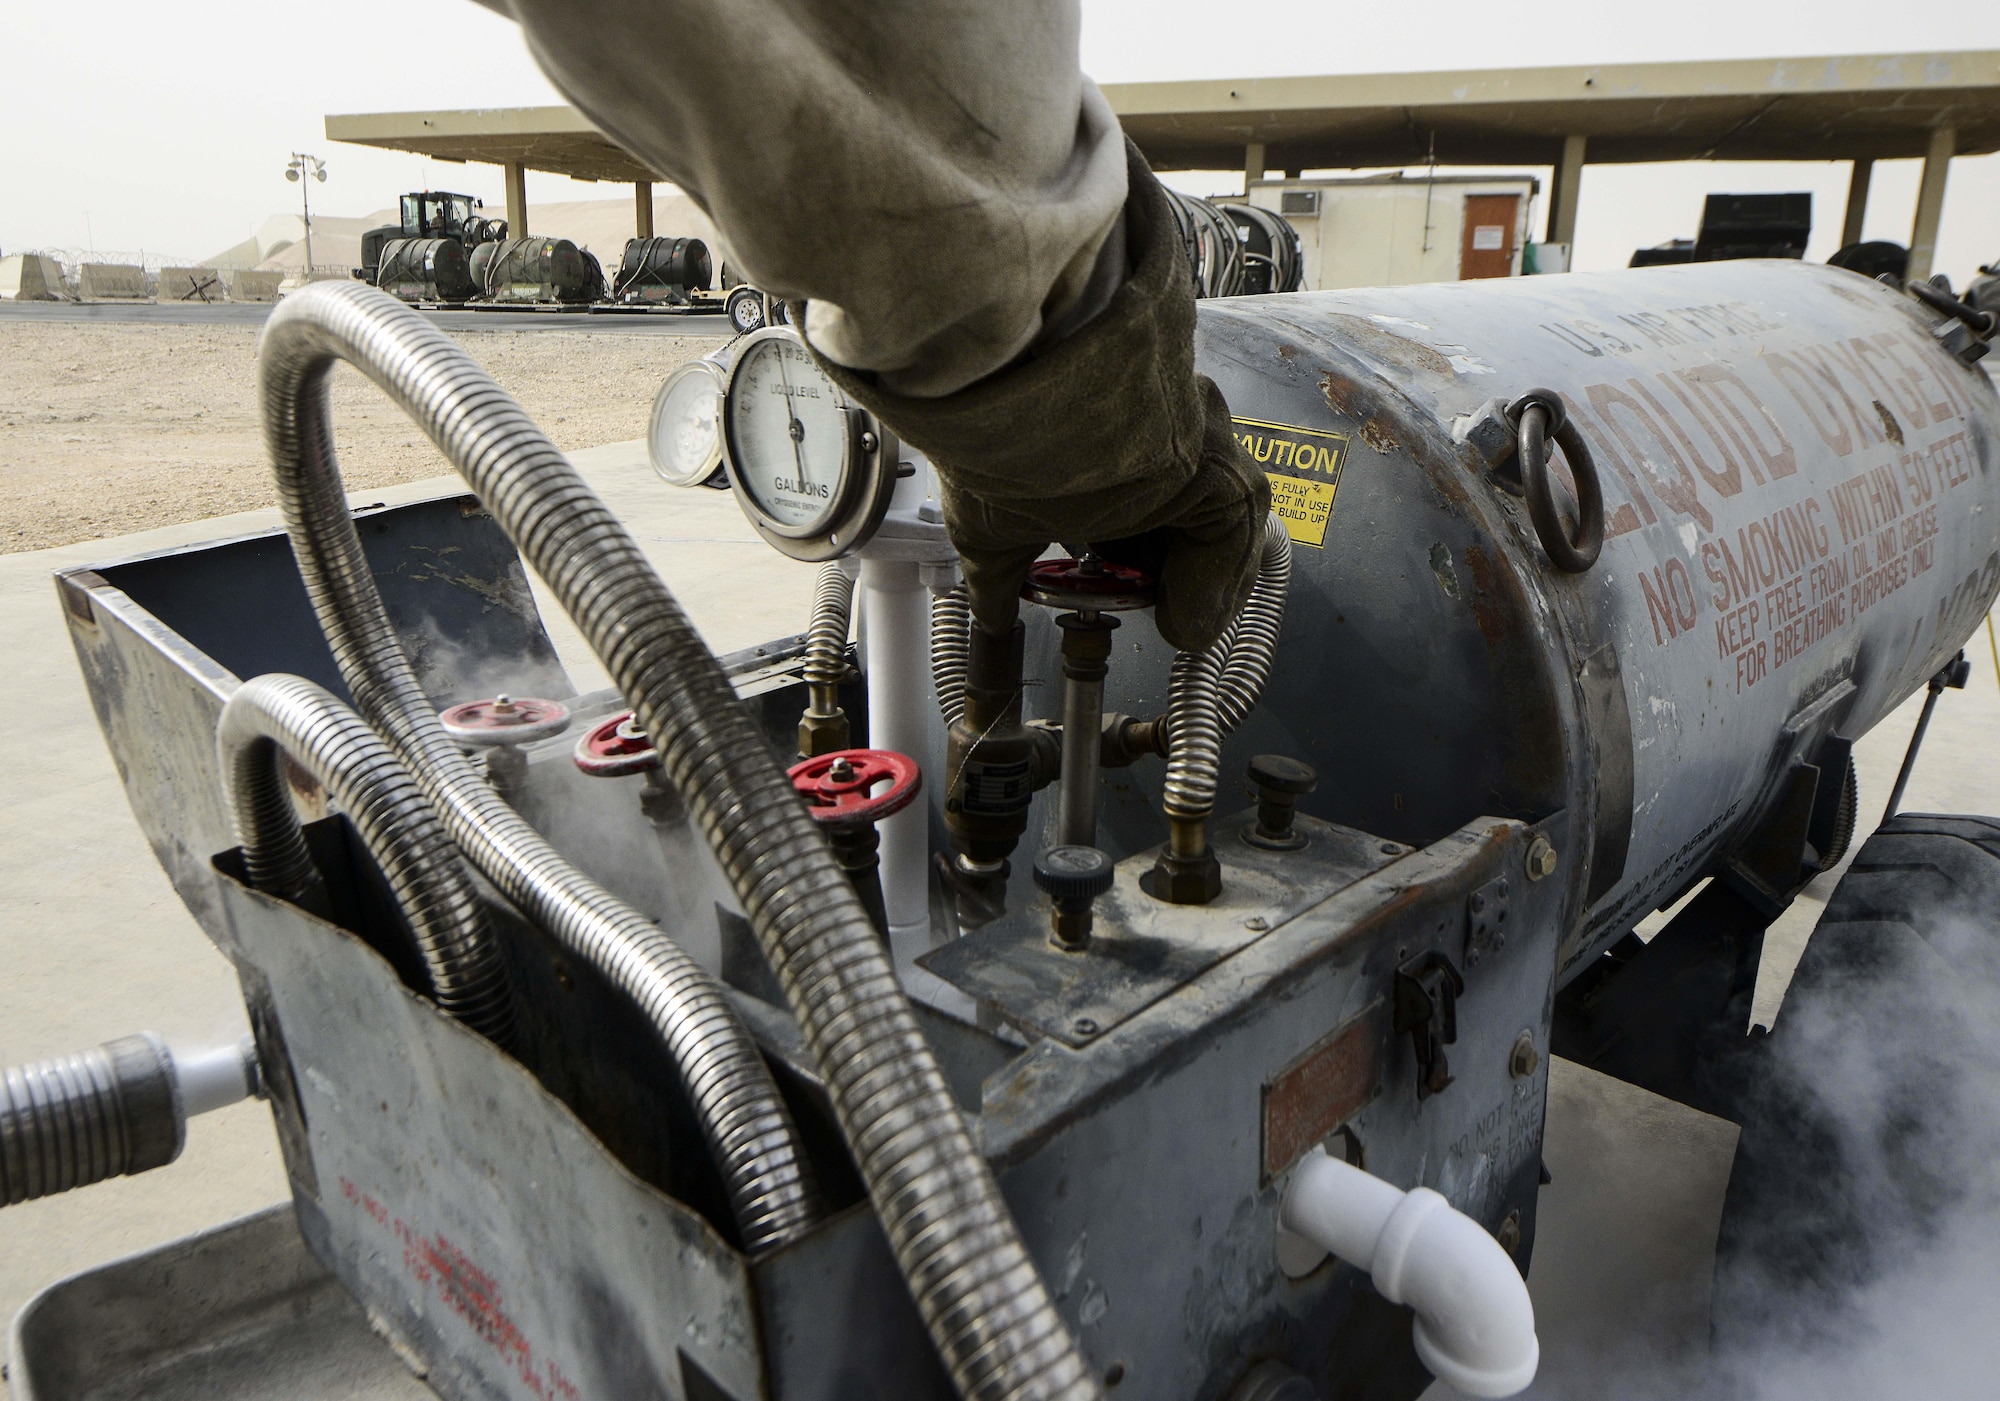 Senior Airman Donte Hatcher, 379th Expeditionary Logistics Readiness Squadron fuels cryogenic operator, opens the vent valve of a 50-gallon liquid oxygen tank during an inspection Aug. 5, 2016, at Al Udeid Air Base, Qatar. The cryogenics team supplies, receives and issues liquid oxygen and liquid nitrogen tanks to 11 bases within the U.S. Air Forces Central Command’s area of responsibility. (U.S. Air Force photo/Senior Airman Janelle Patiño/Released)